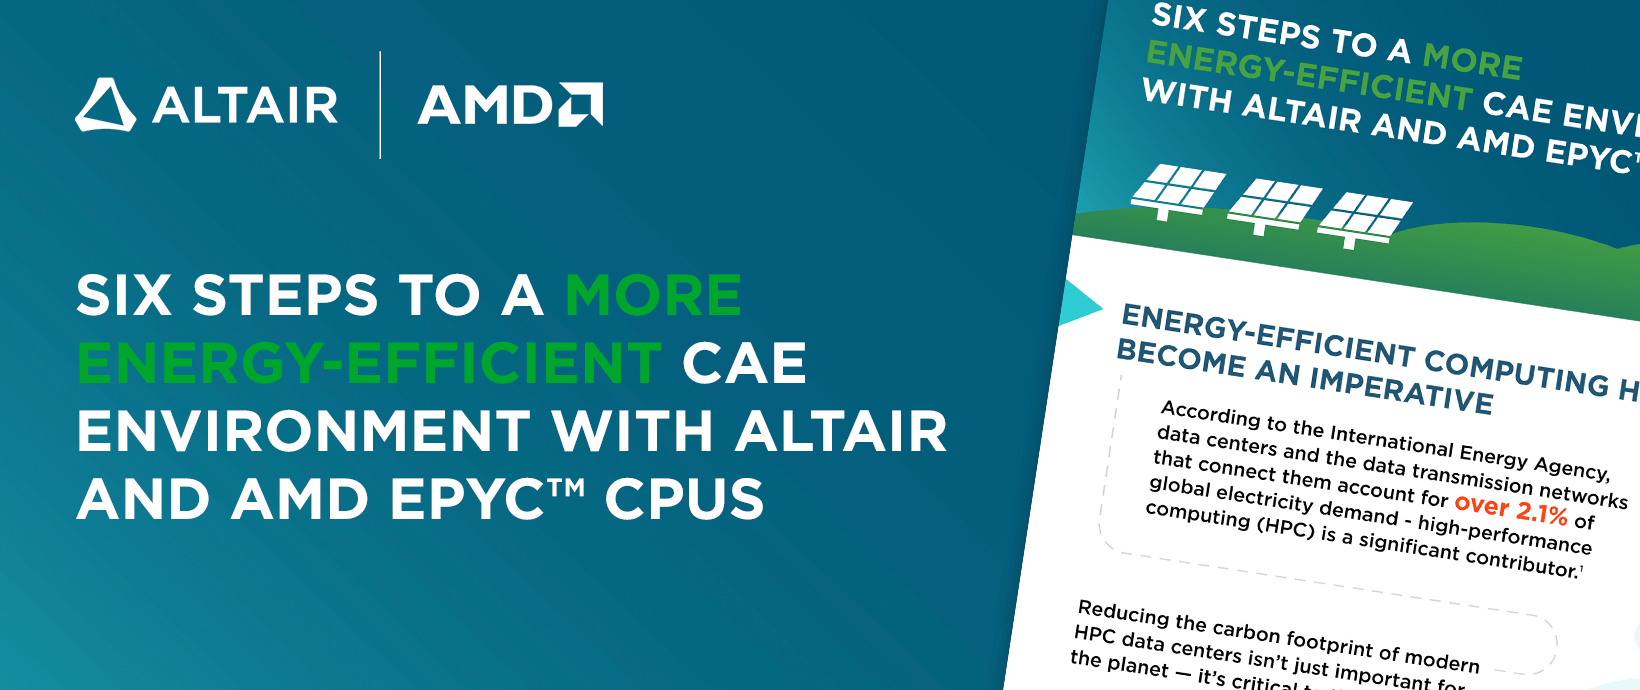 Six Steps to a More Energy-Efficient CAE Environment with Altair and AMD EPYC™ CPUs